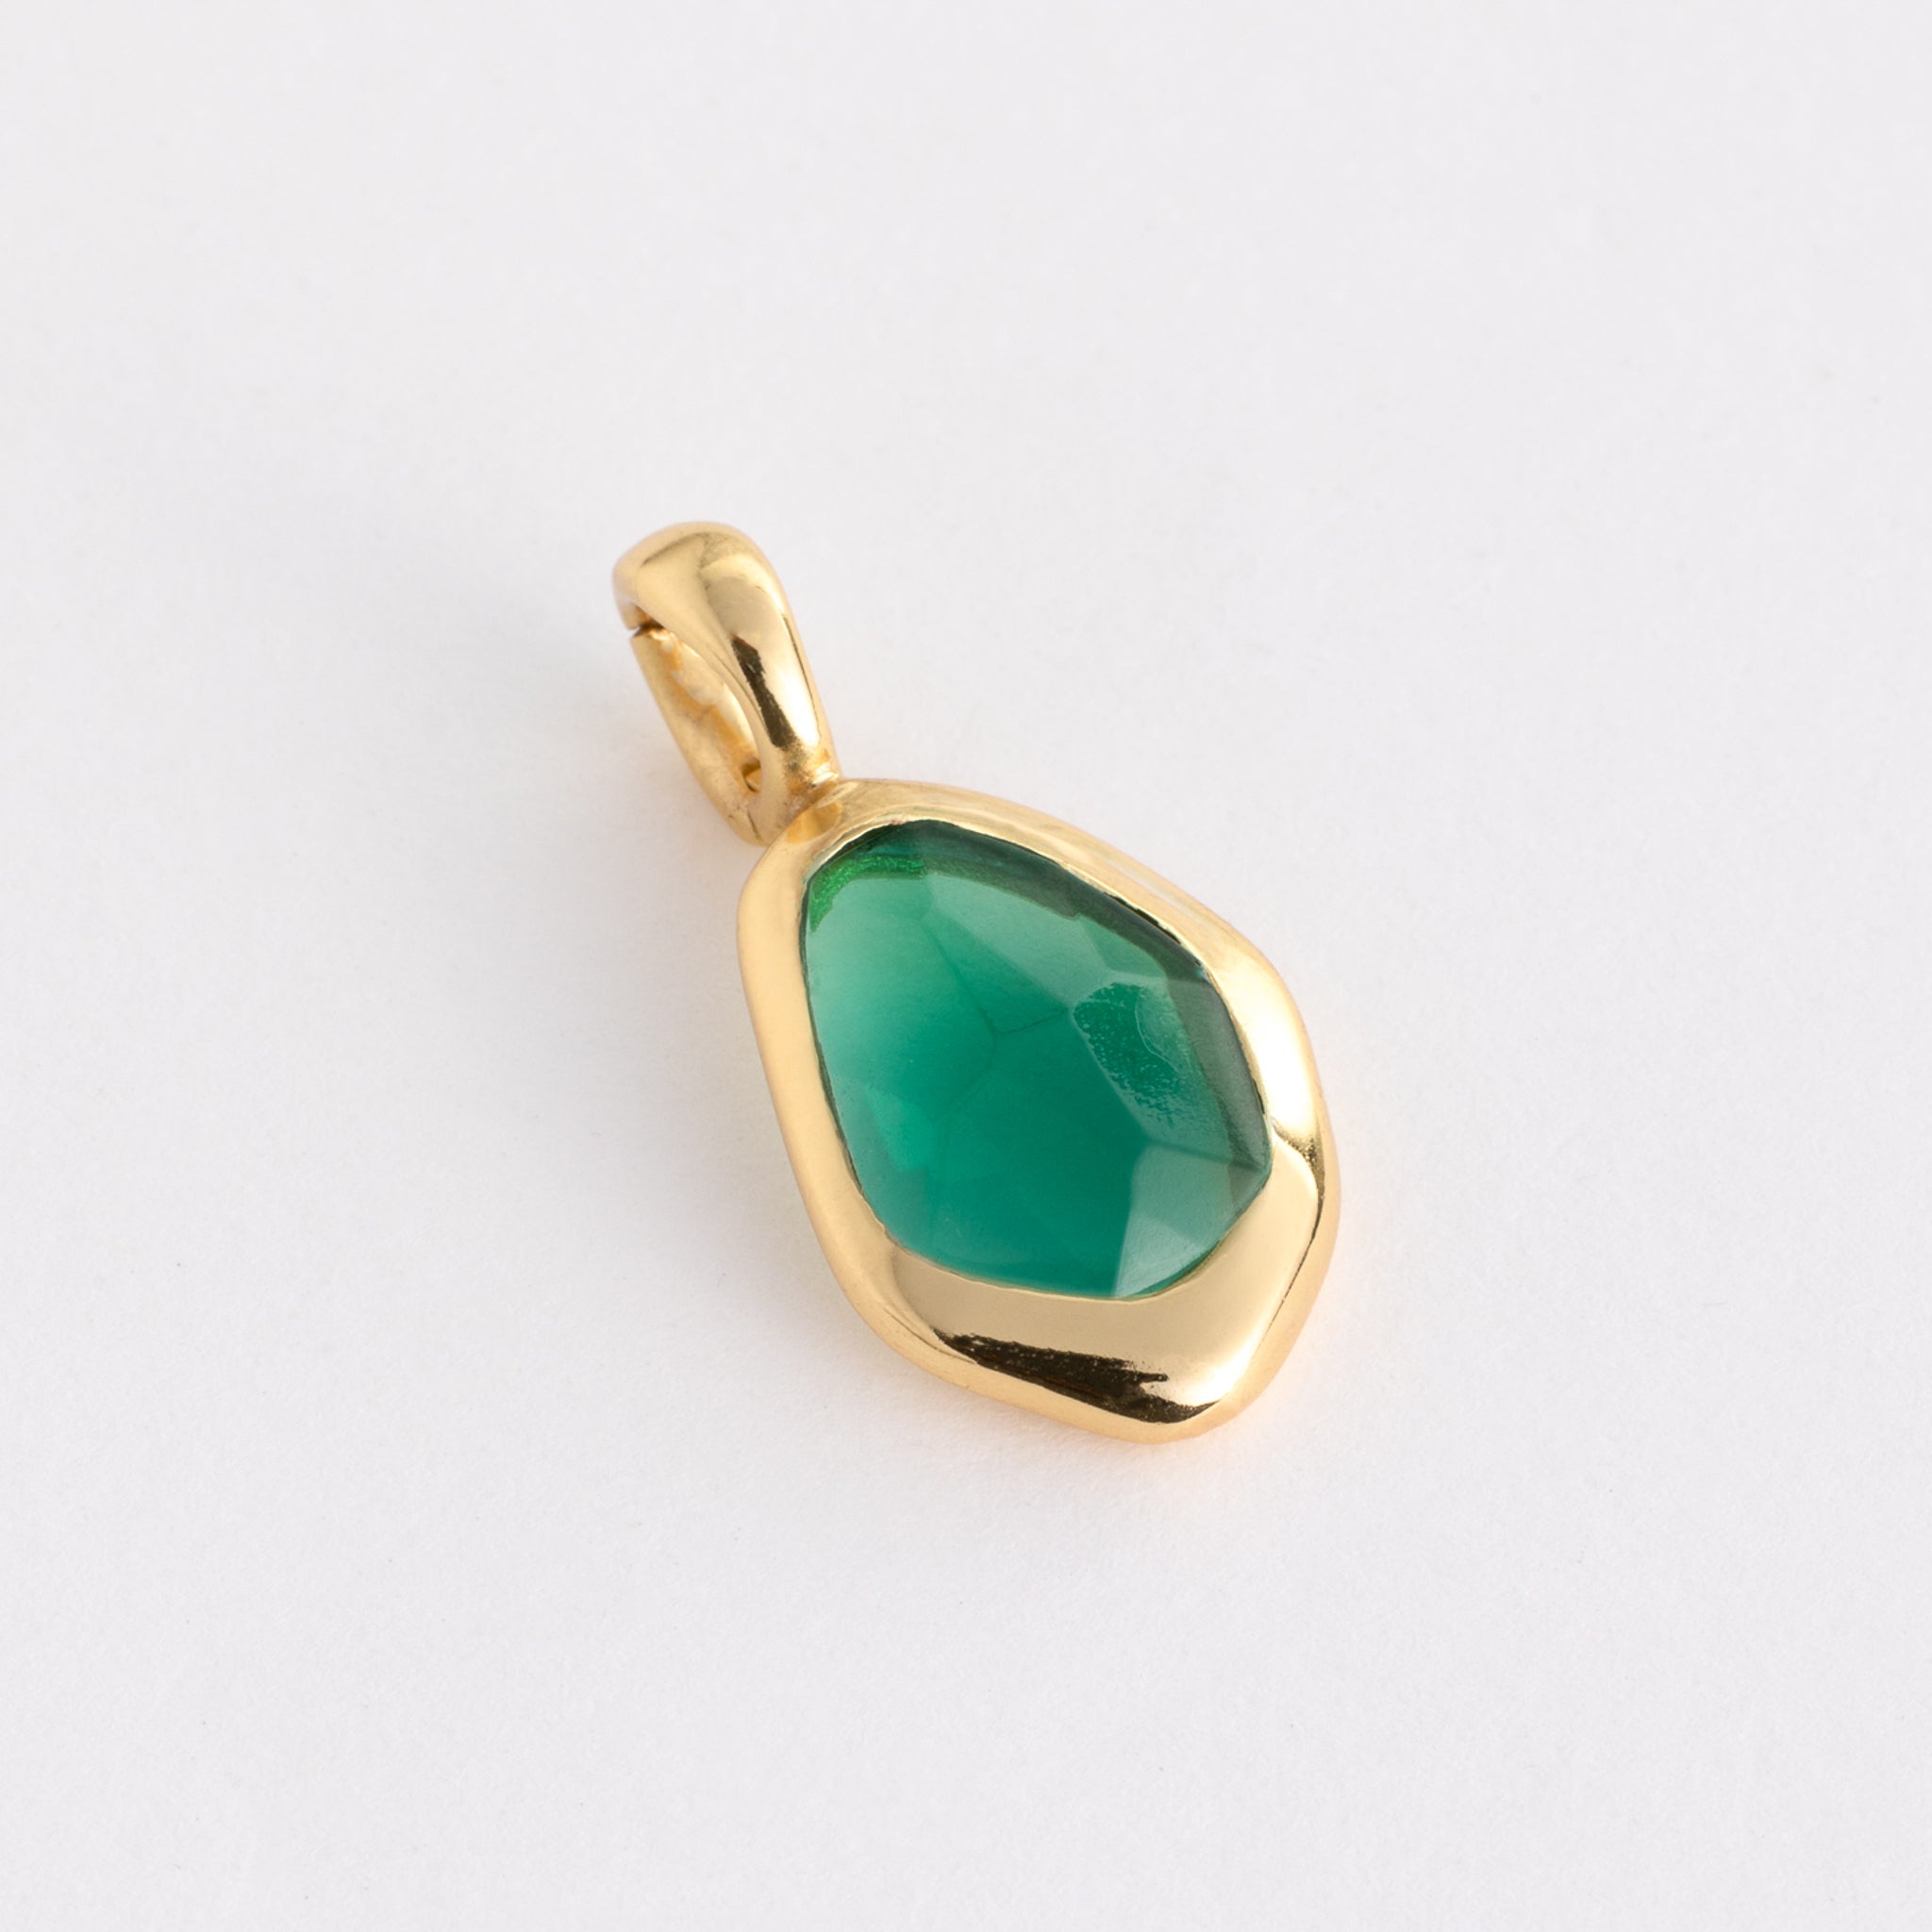 Charm features a sparkling, handcut natural gemstone and is crafted from sterling silver or 18ct gold vermeil.